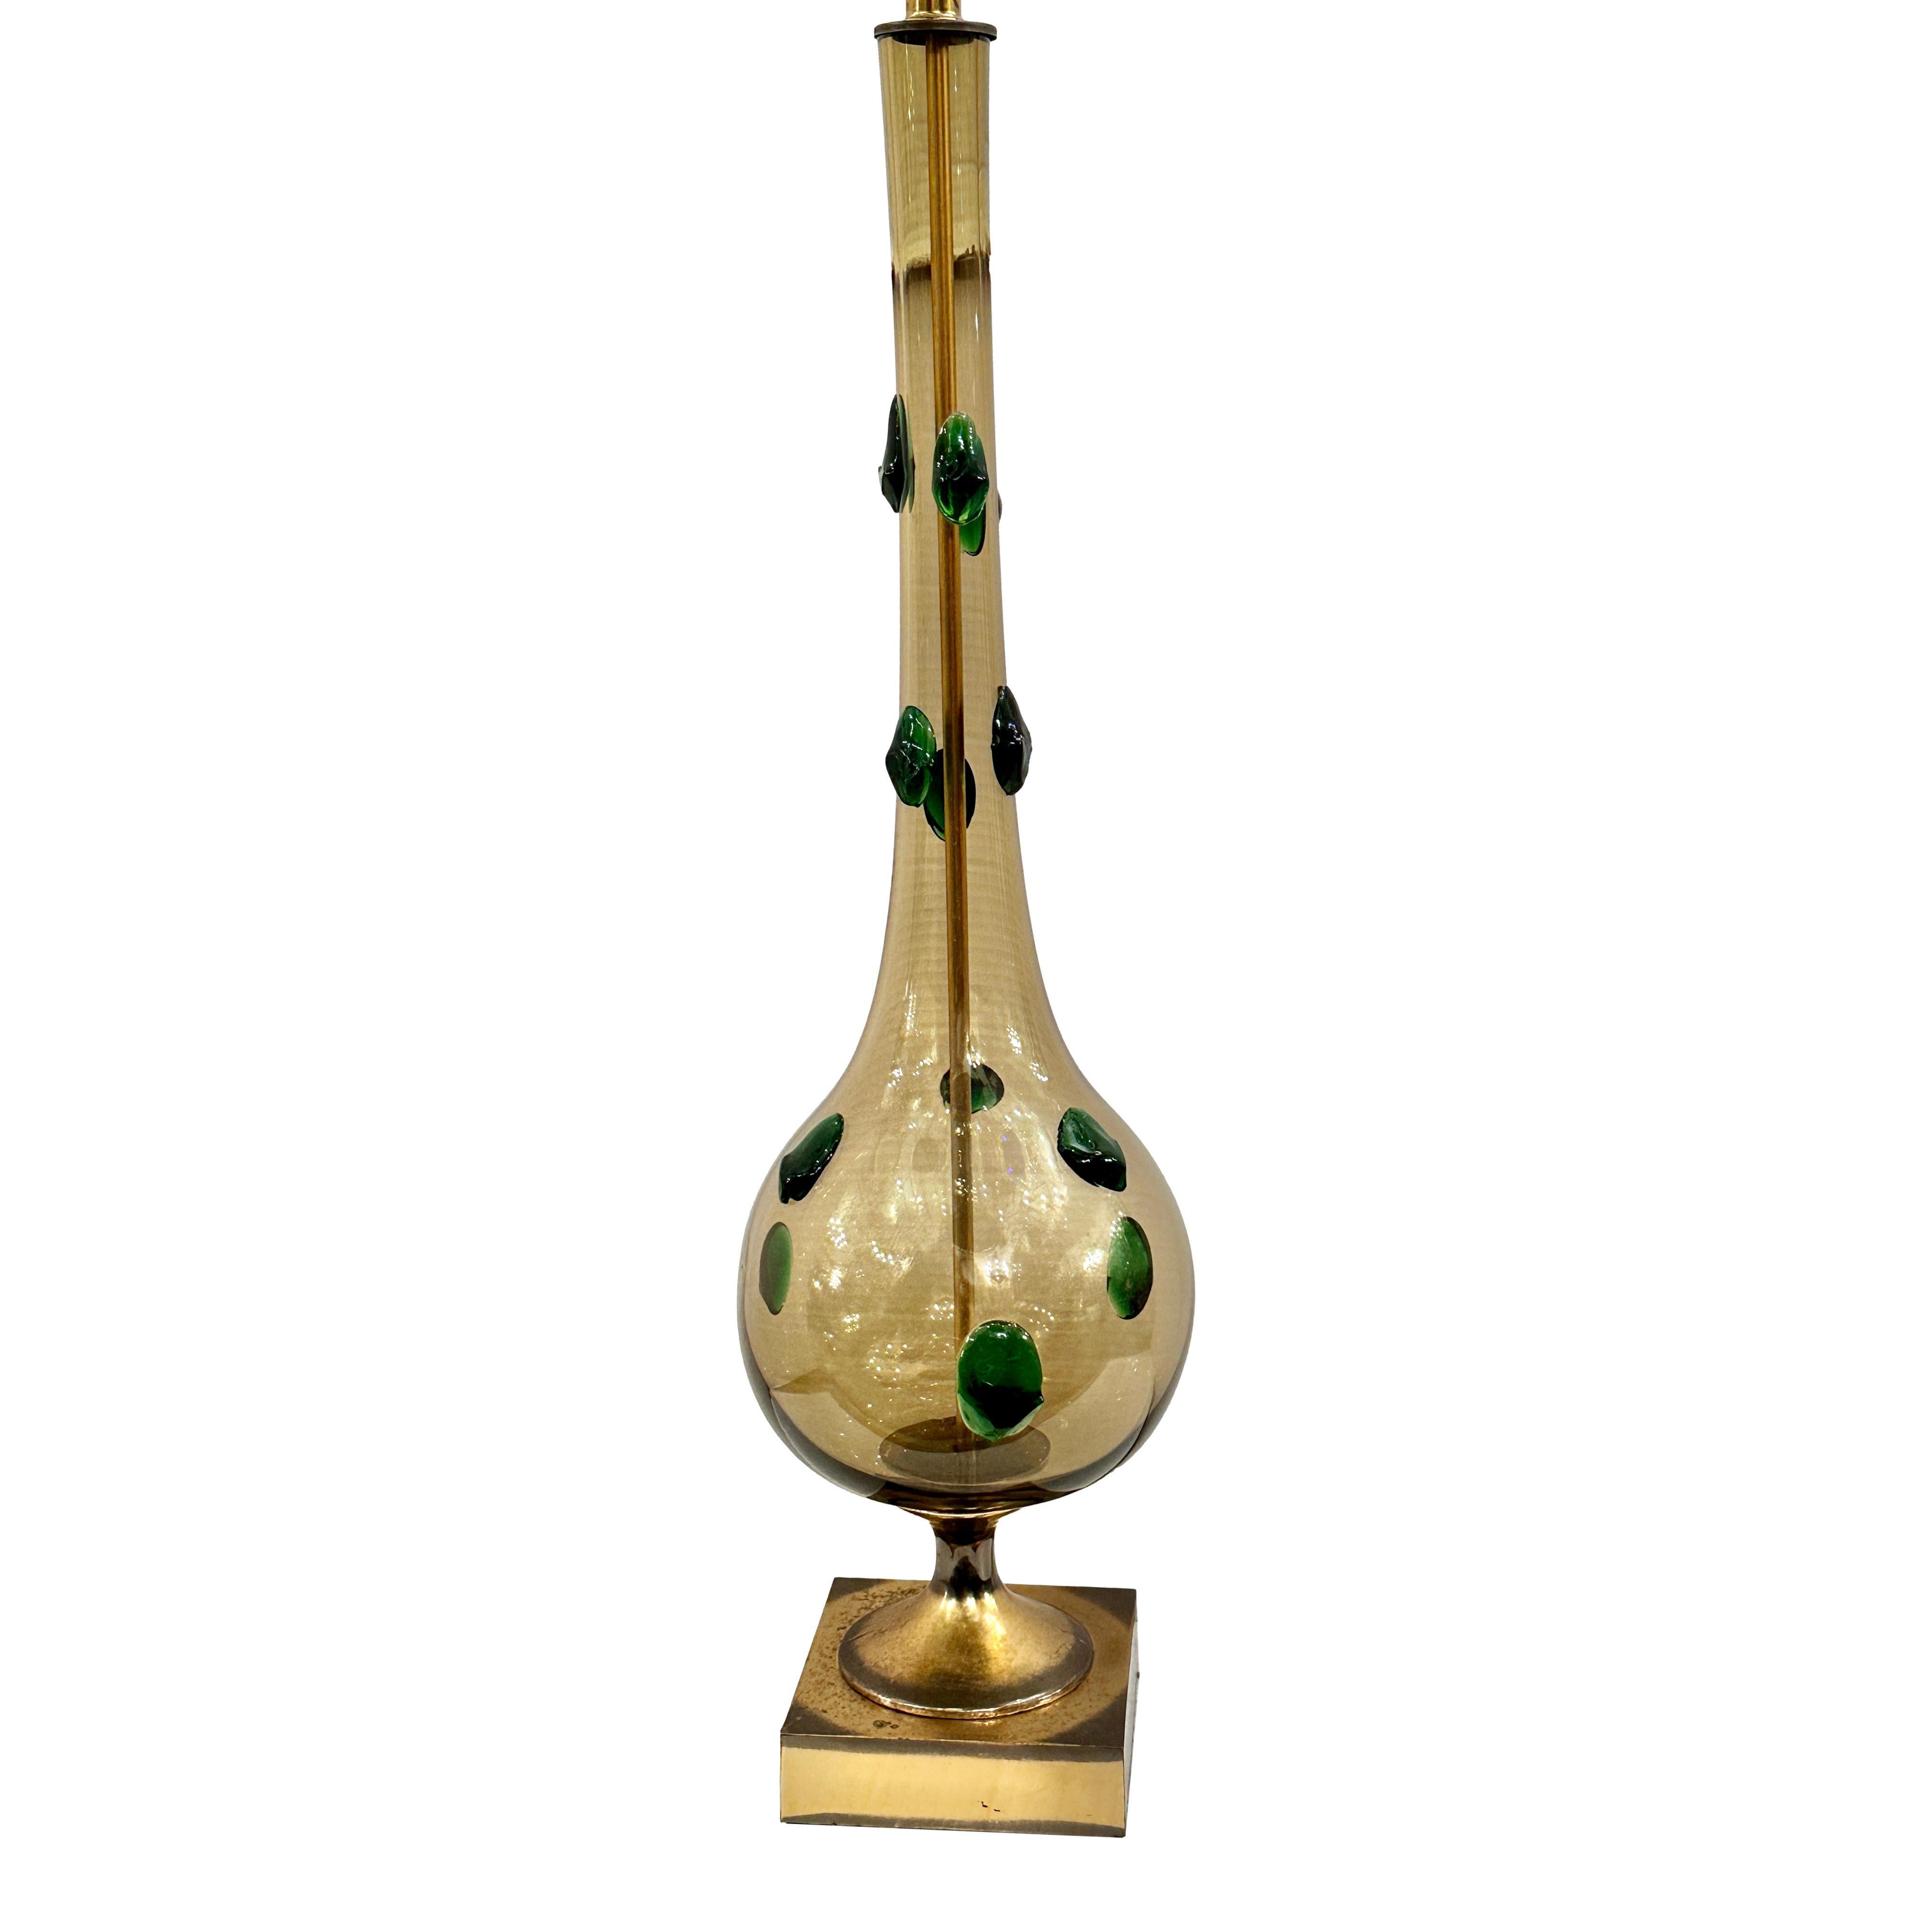 A circa 1960's blown glass Murano lamp.

Measurements:
Height of body: 31